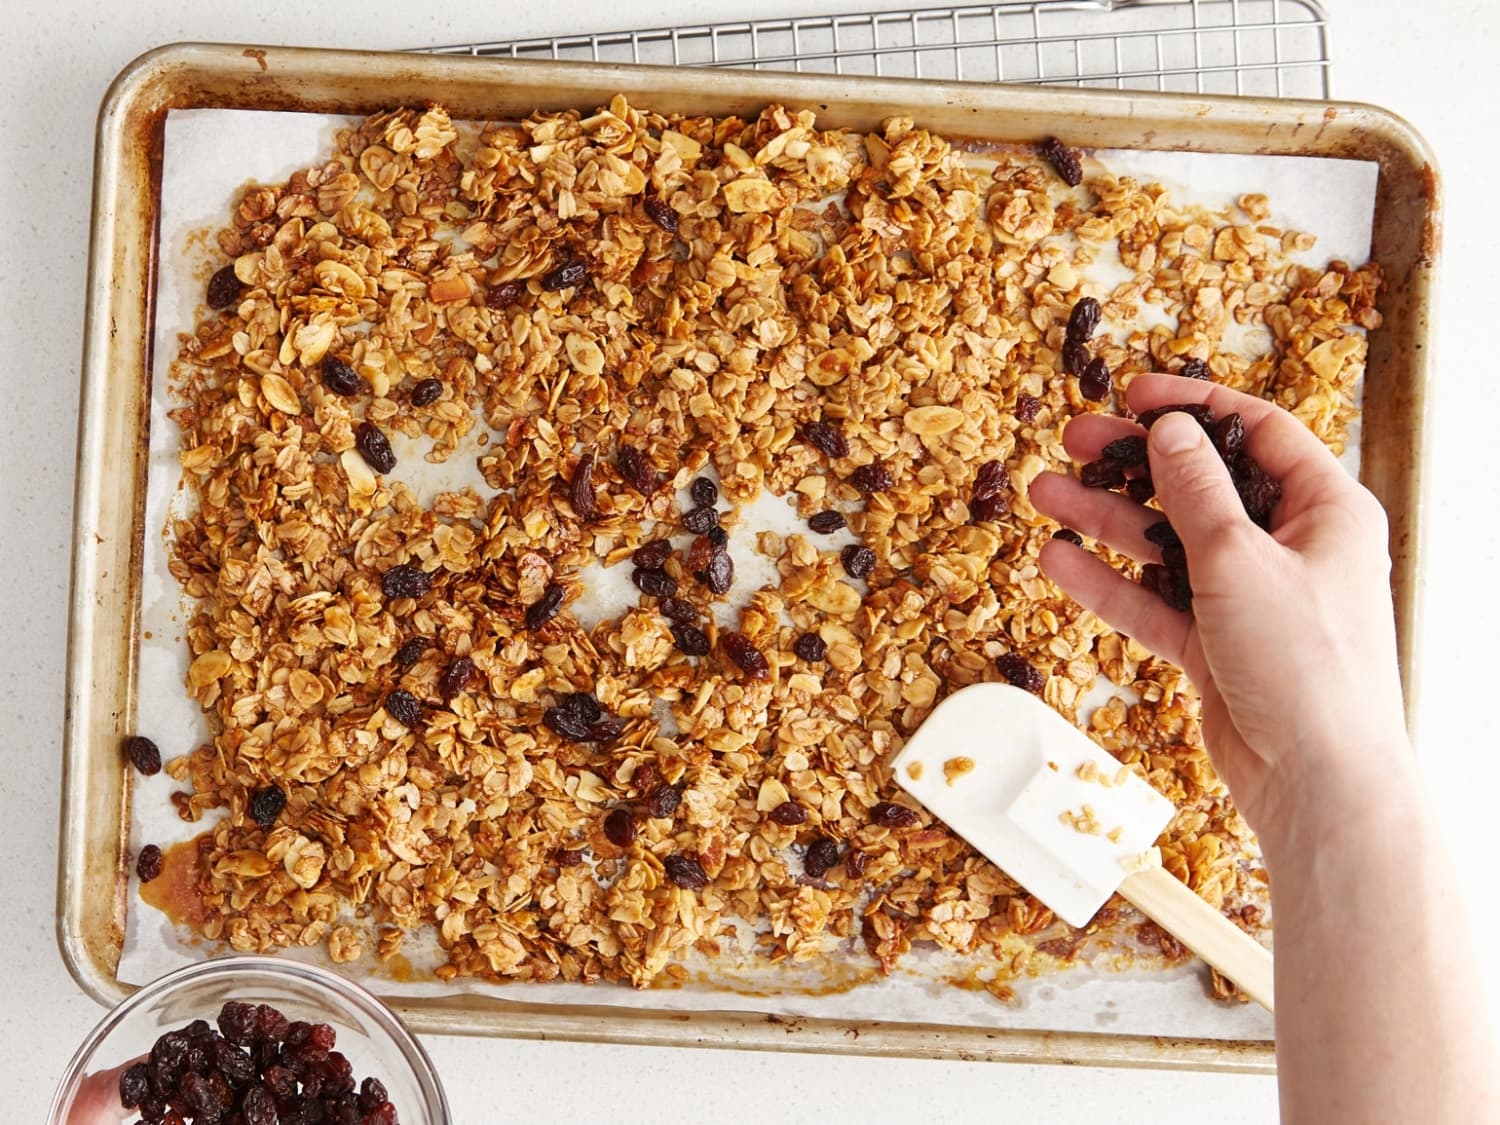 How To Make Easy Homemade Granola | The Kitchn